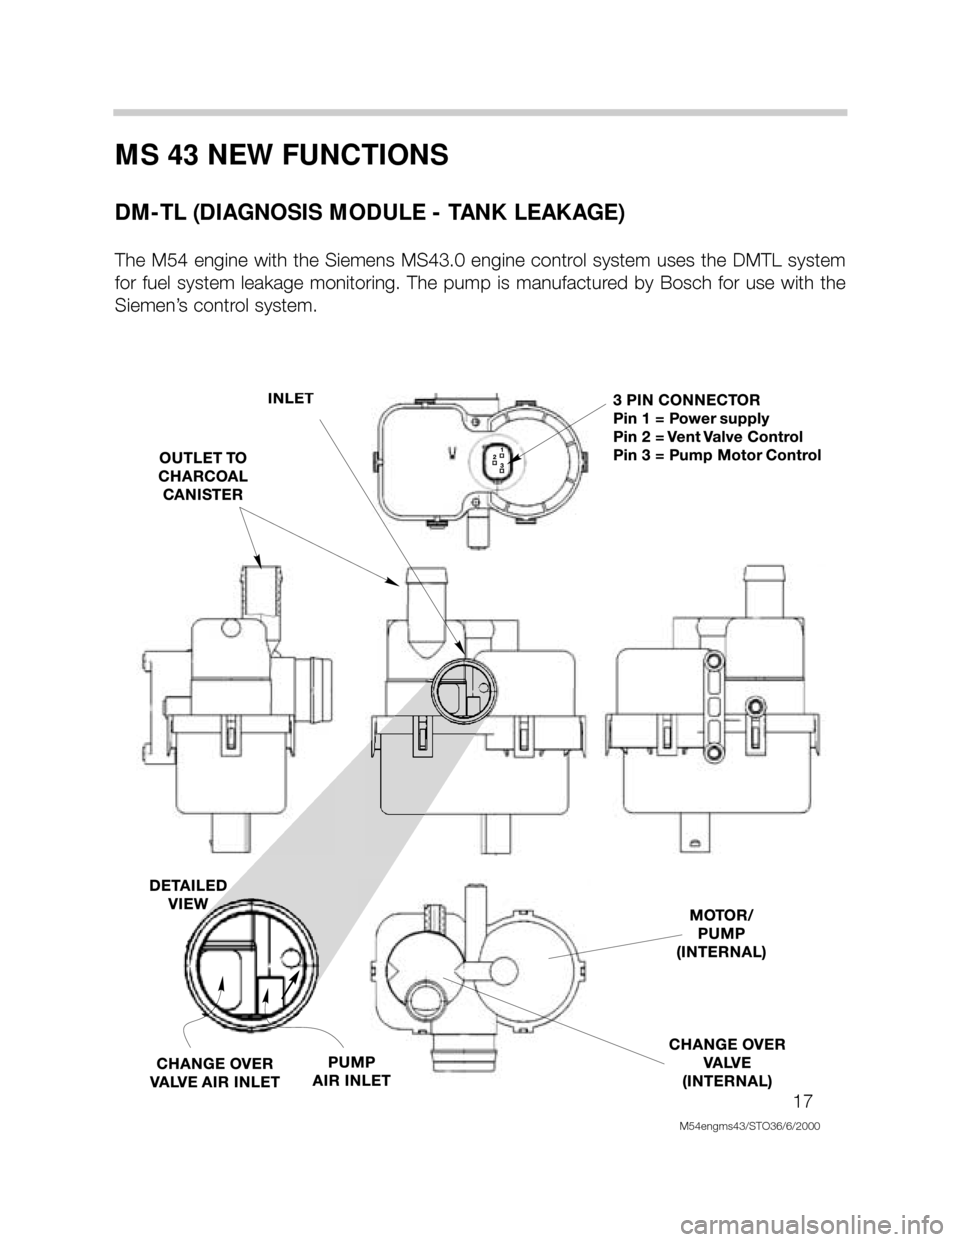 BMW X5 2005 E53 M54 Engine User Guide 17
M54engms43/STO36/6/2000
MS 43 NEW FUNCTIONS
DM-TL (DIAGNOSIS MODULE - TANK LEAKAGE)
The  M54  engine  with  the  Siemens  MS43.0  engine  control  system  uses  the  DMTL  system
for  fuel  system 